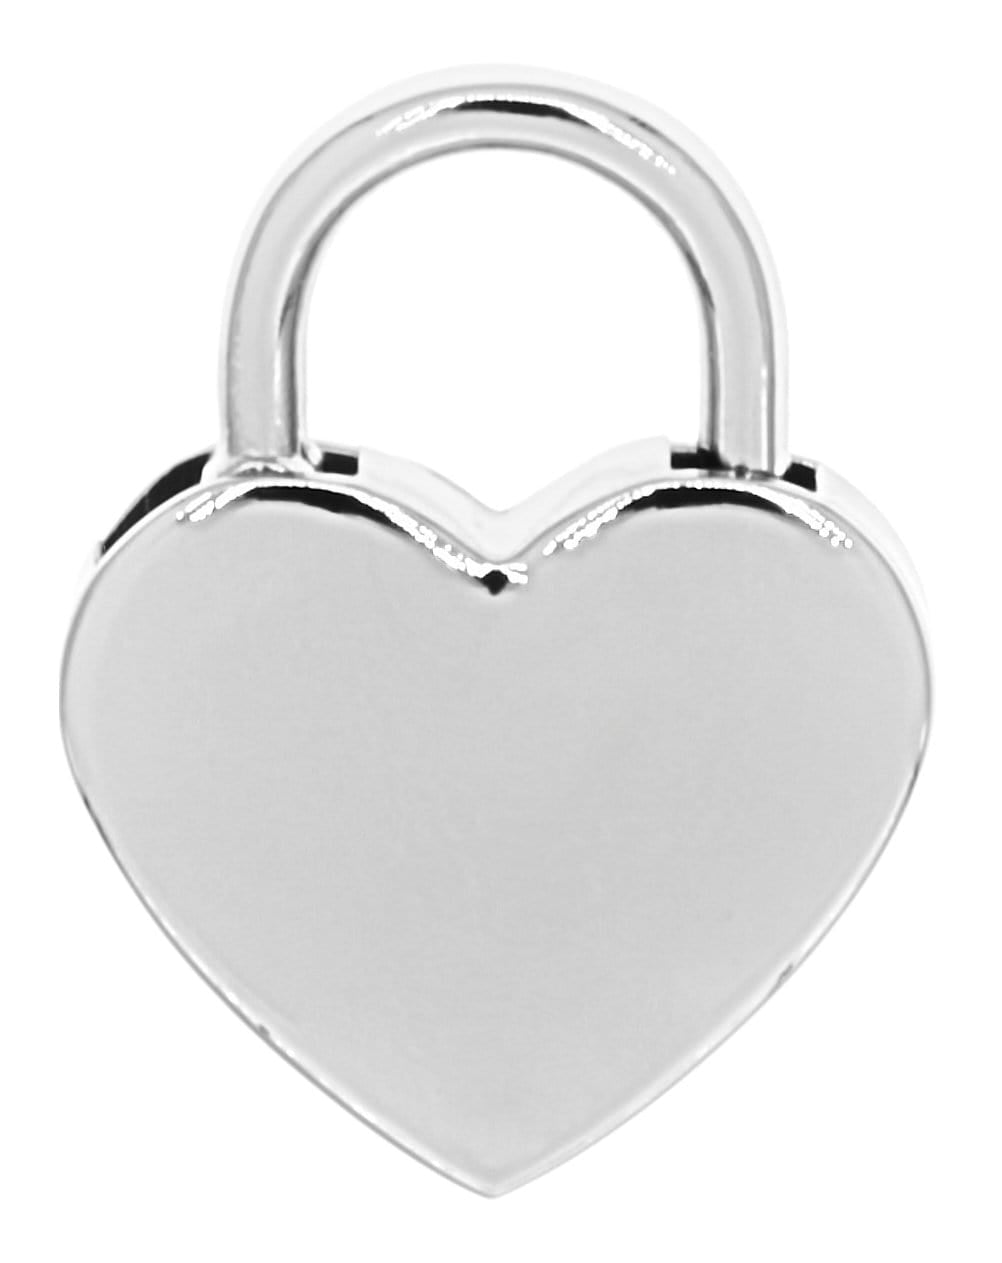 The back of the nickel large heart lock.